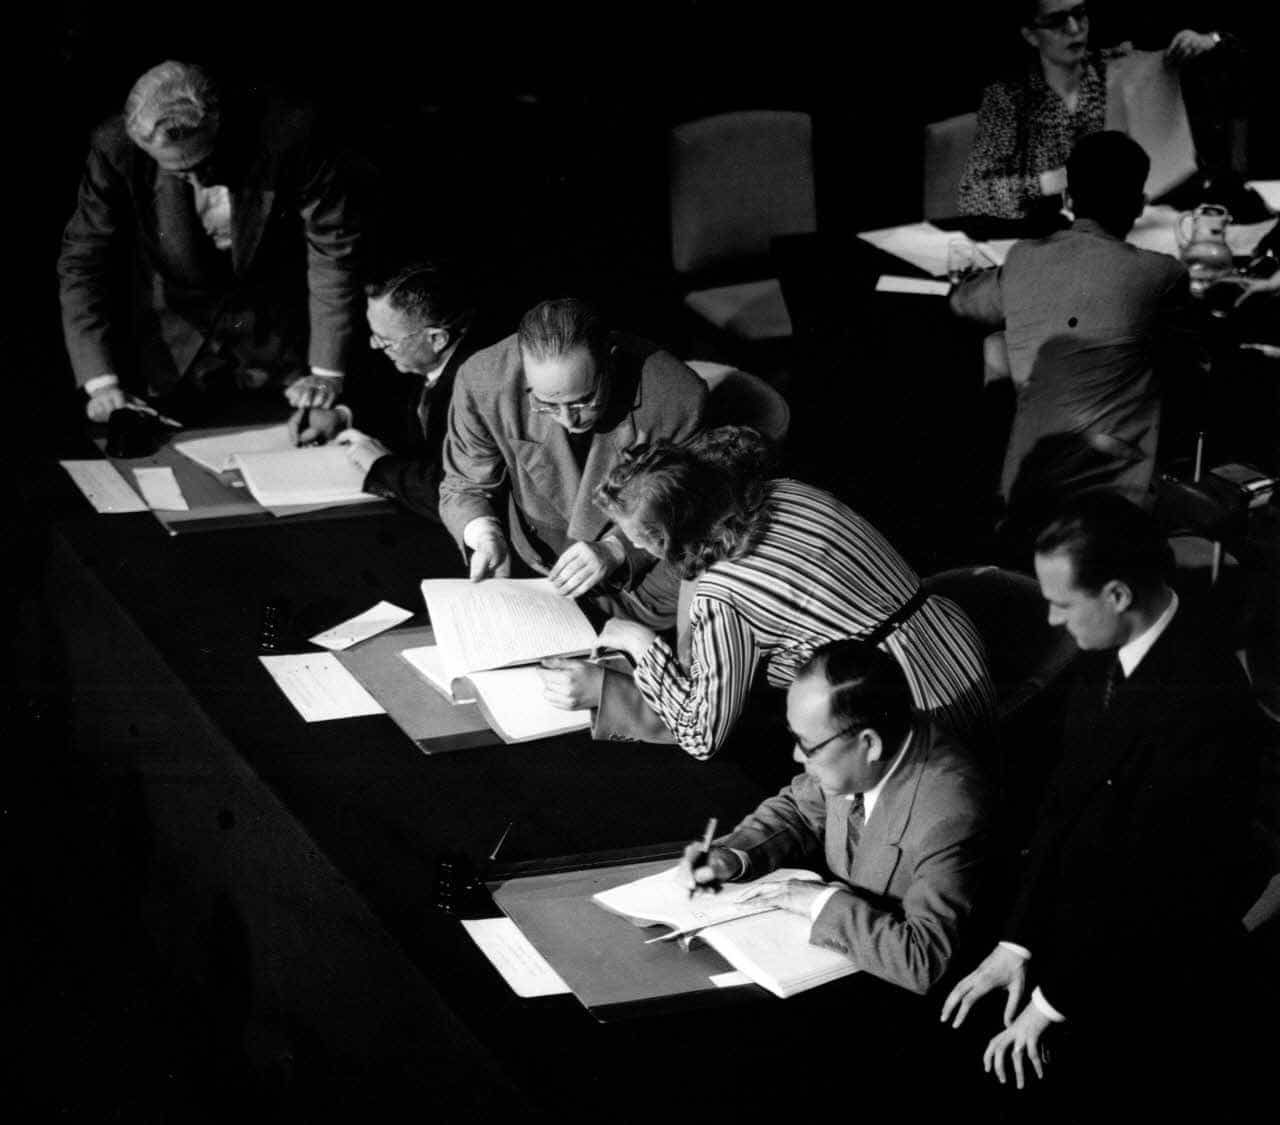 Country delegates signed global health agreements, including the WHO constitution, at the International Health Conference held in New York in June and July 1946. (WHO/UN)